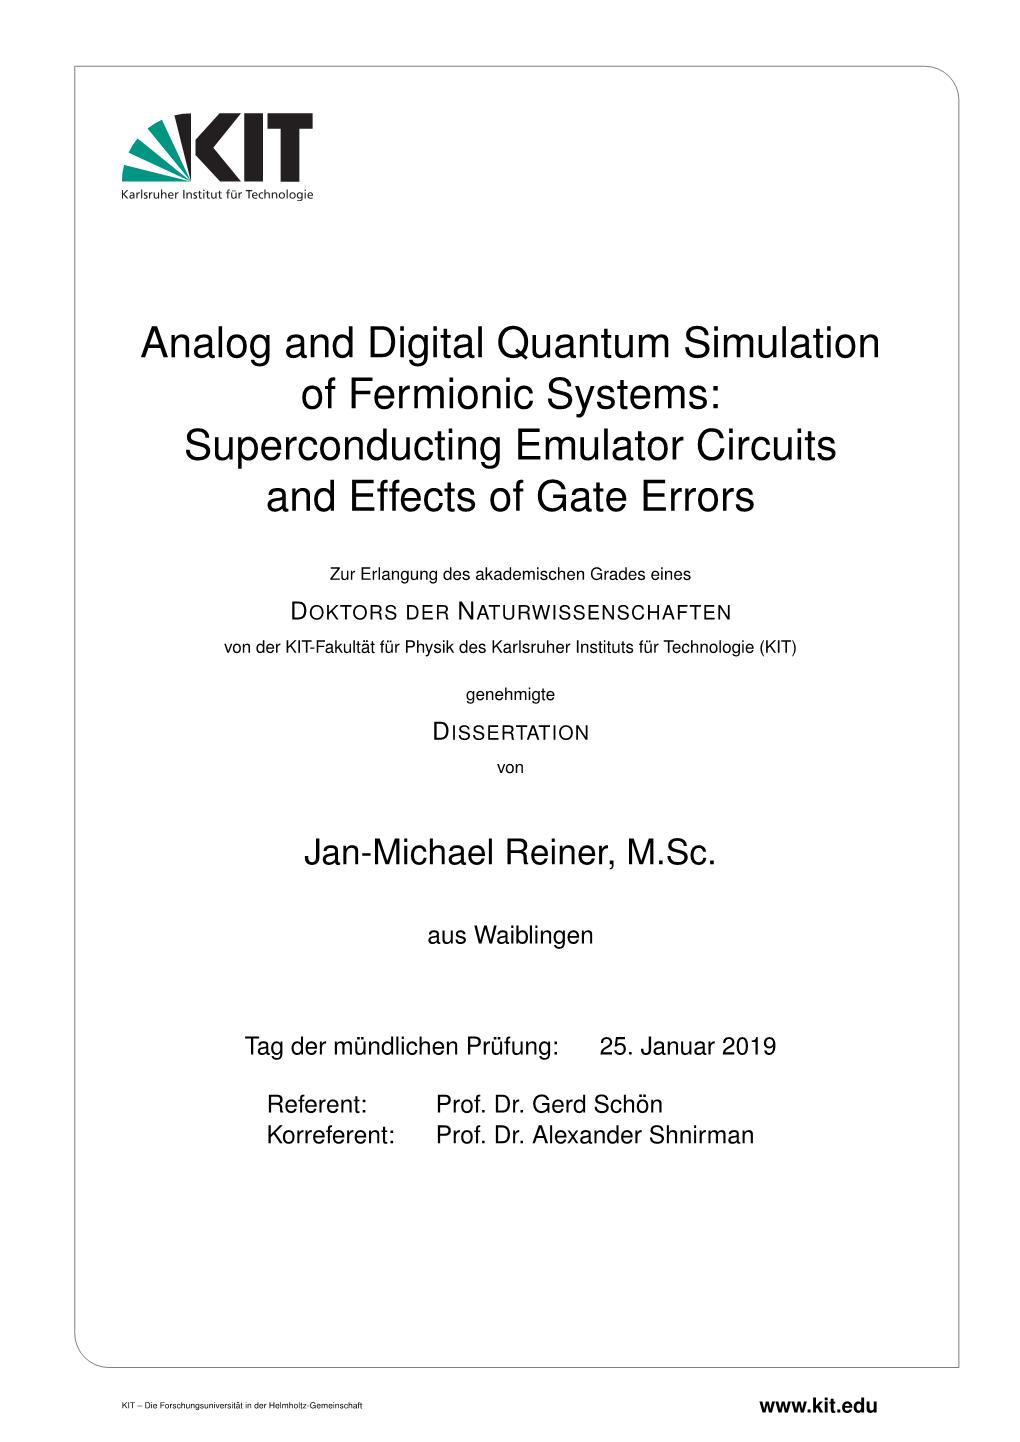 Analog and Digital Quantum Simulation of Fermionic Systems: Superconducting Emulator Circuits and Effects of Gate Errors